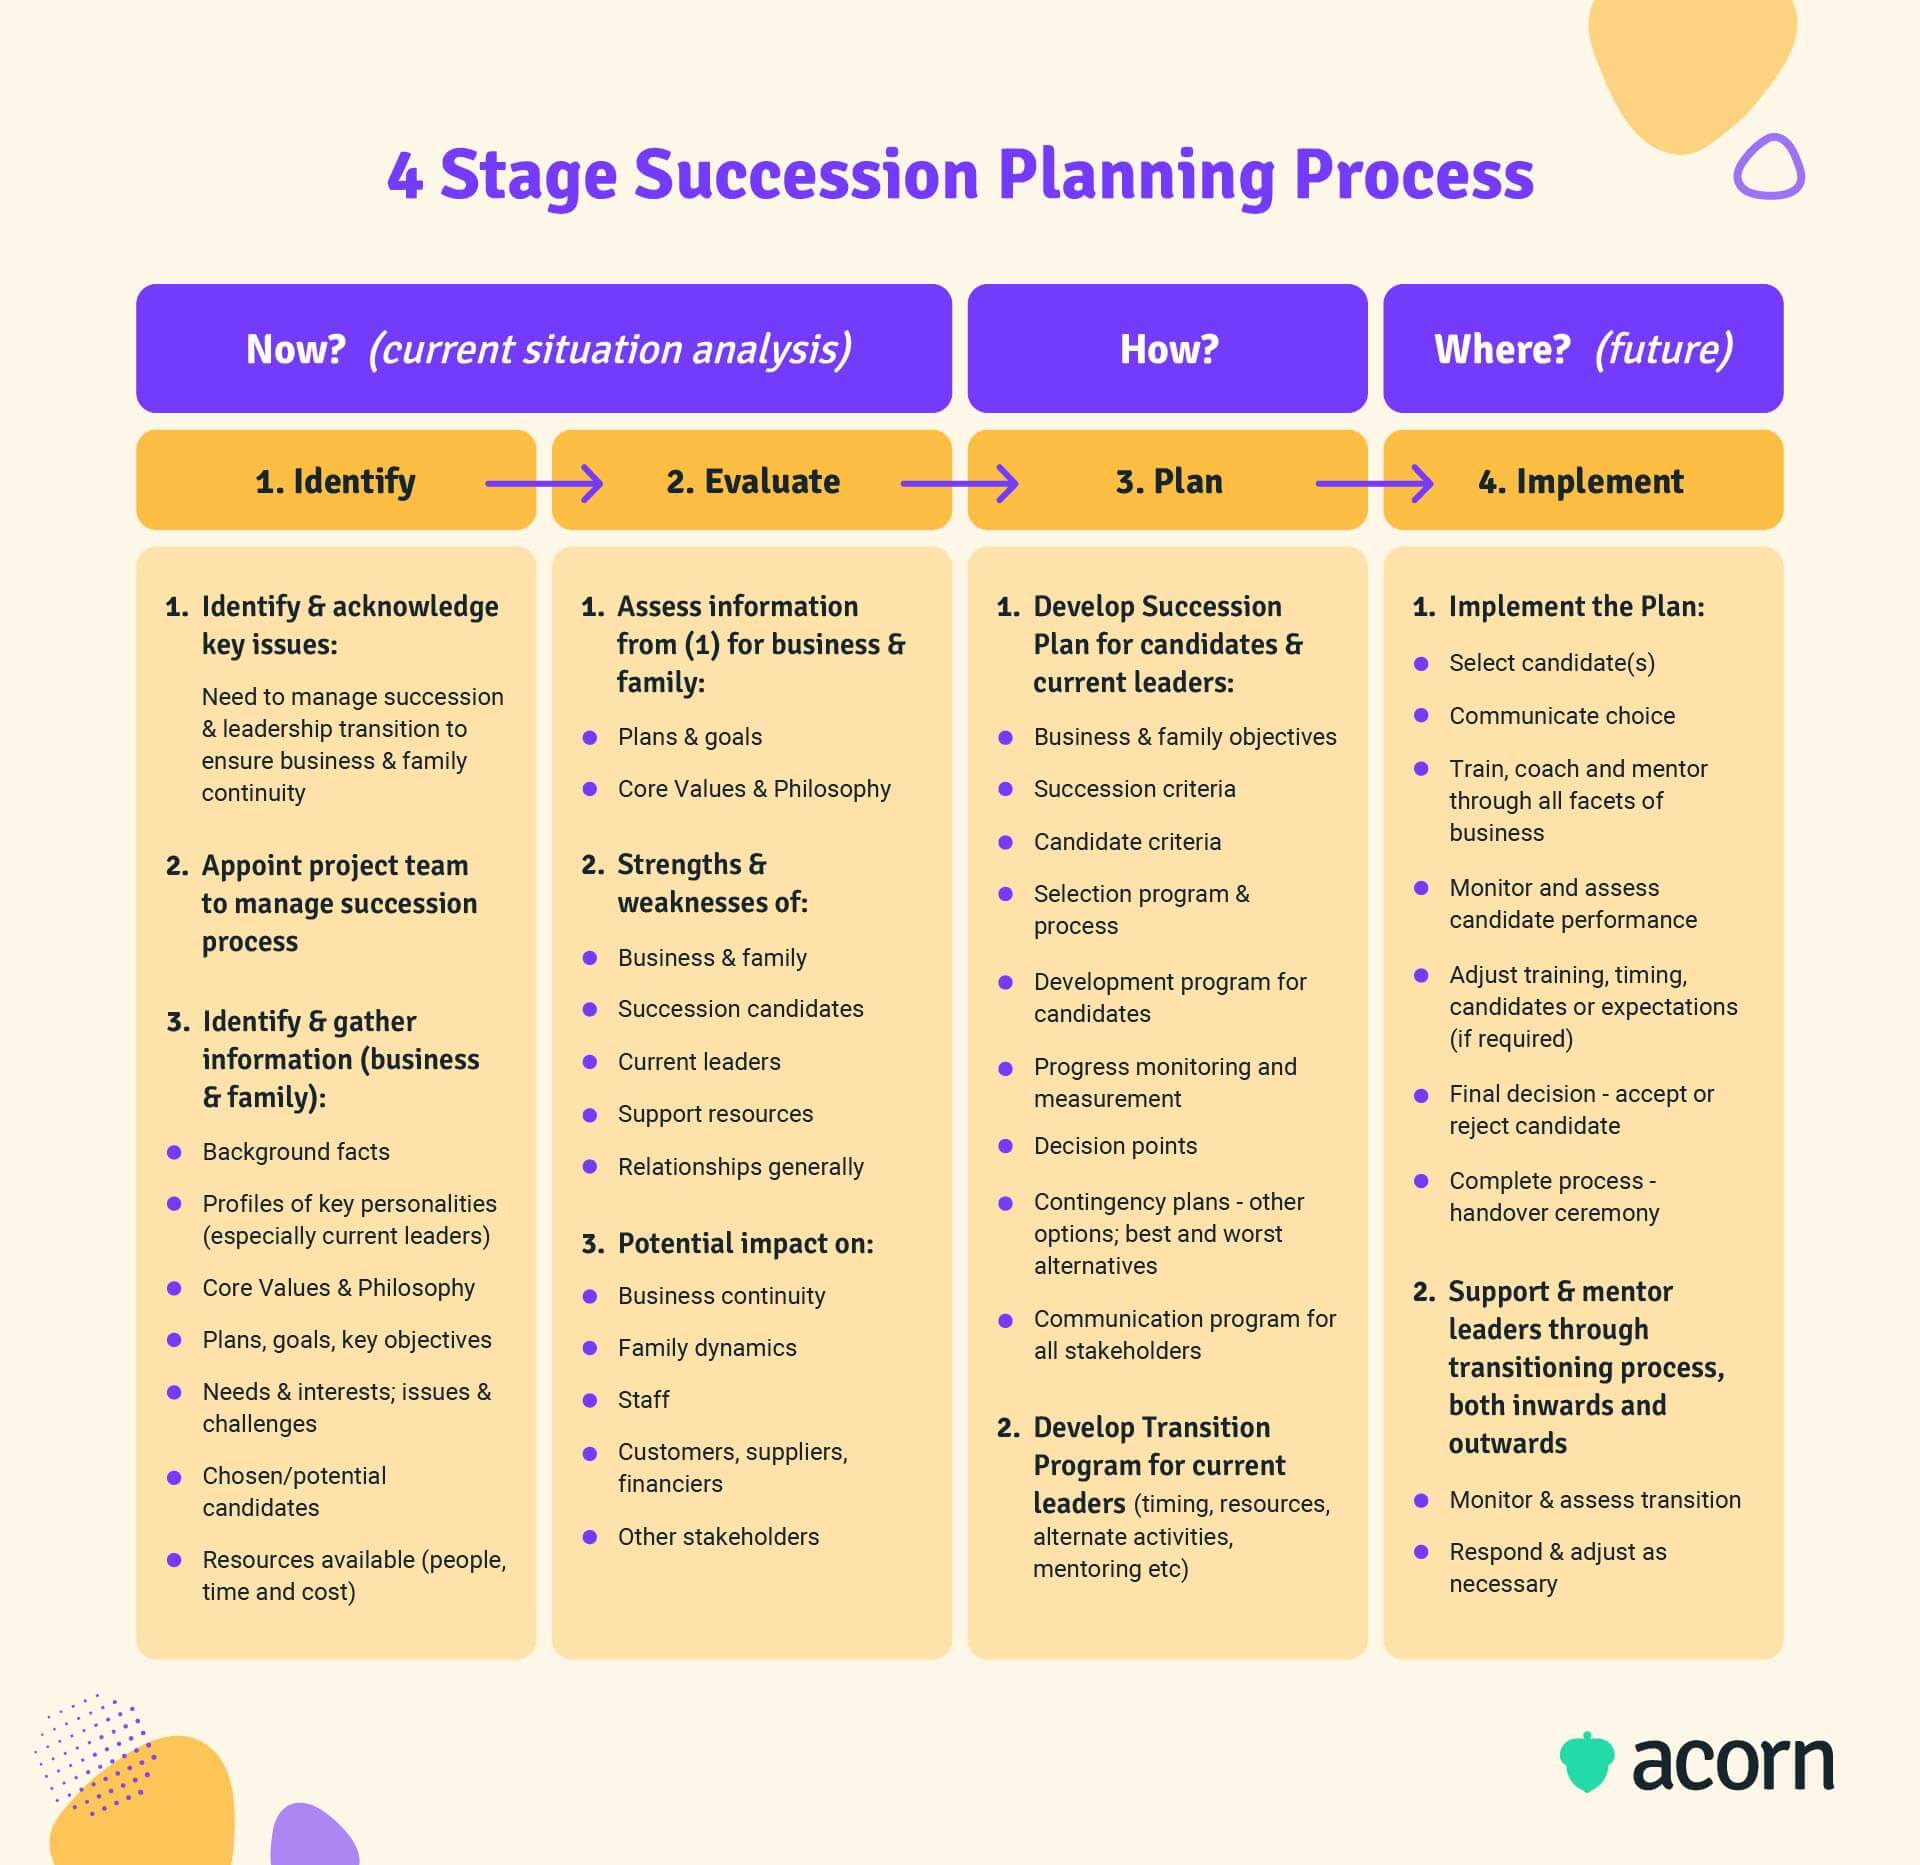 Table showing the four phases of identify, evaluate, plan, and implement for business succession planning